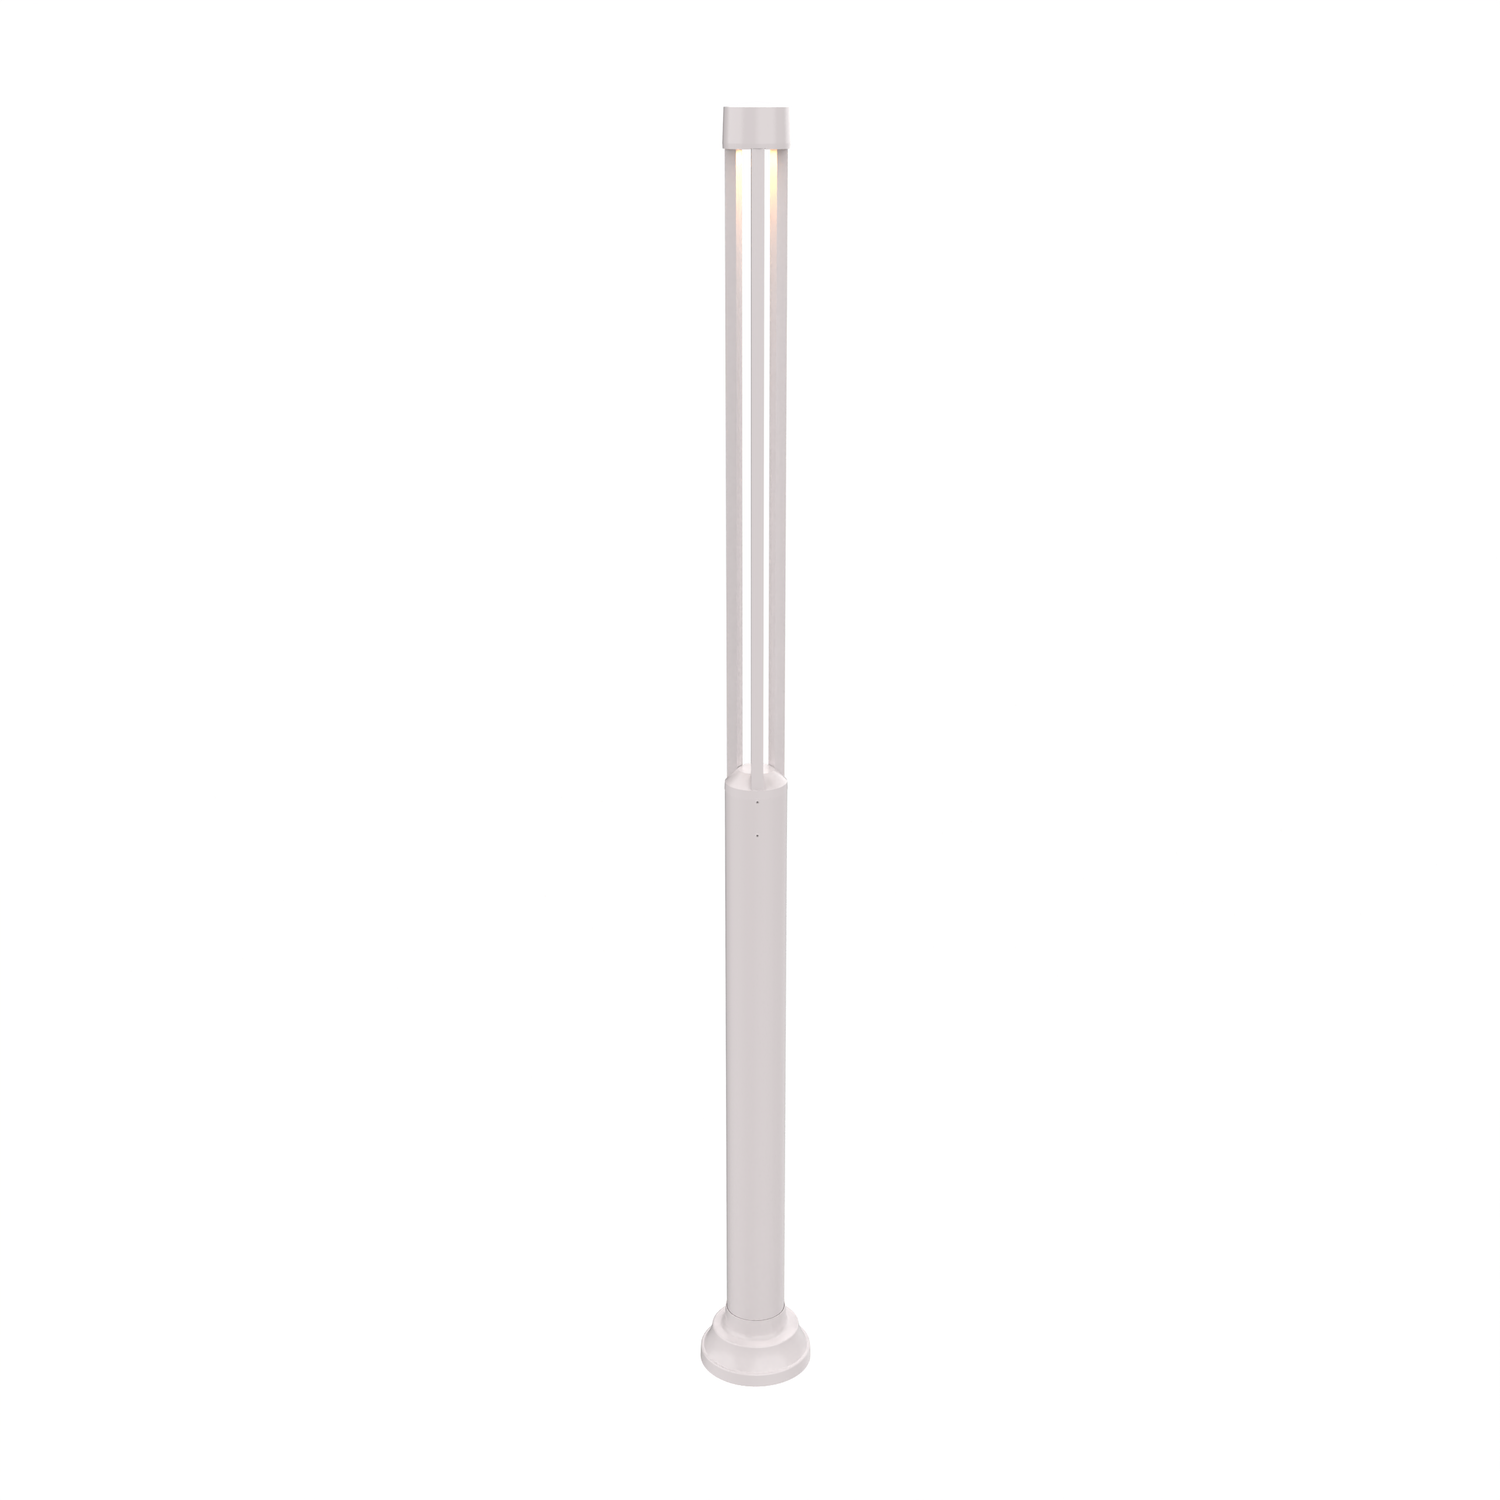 Orlando - Pole Mount with Integrated LED - 10930